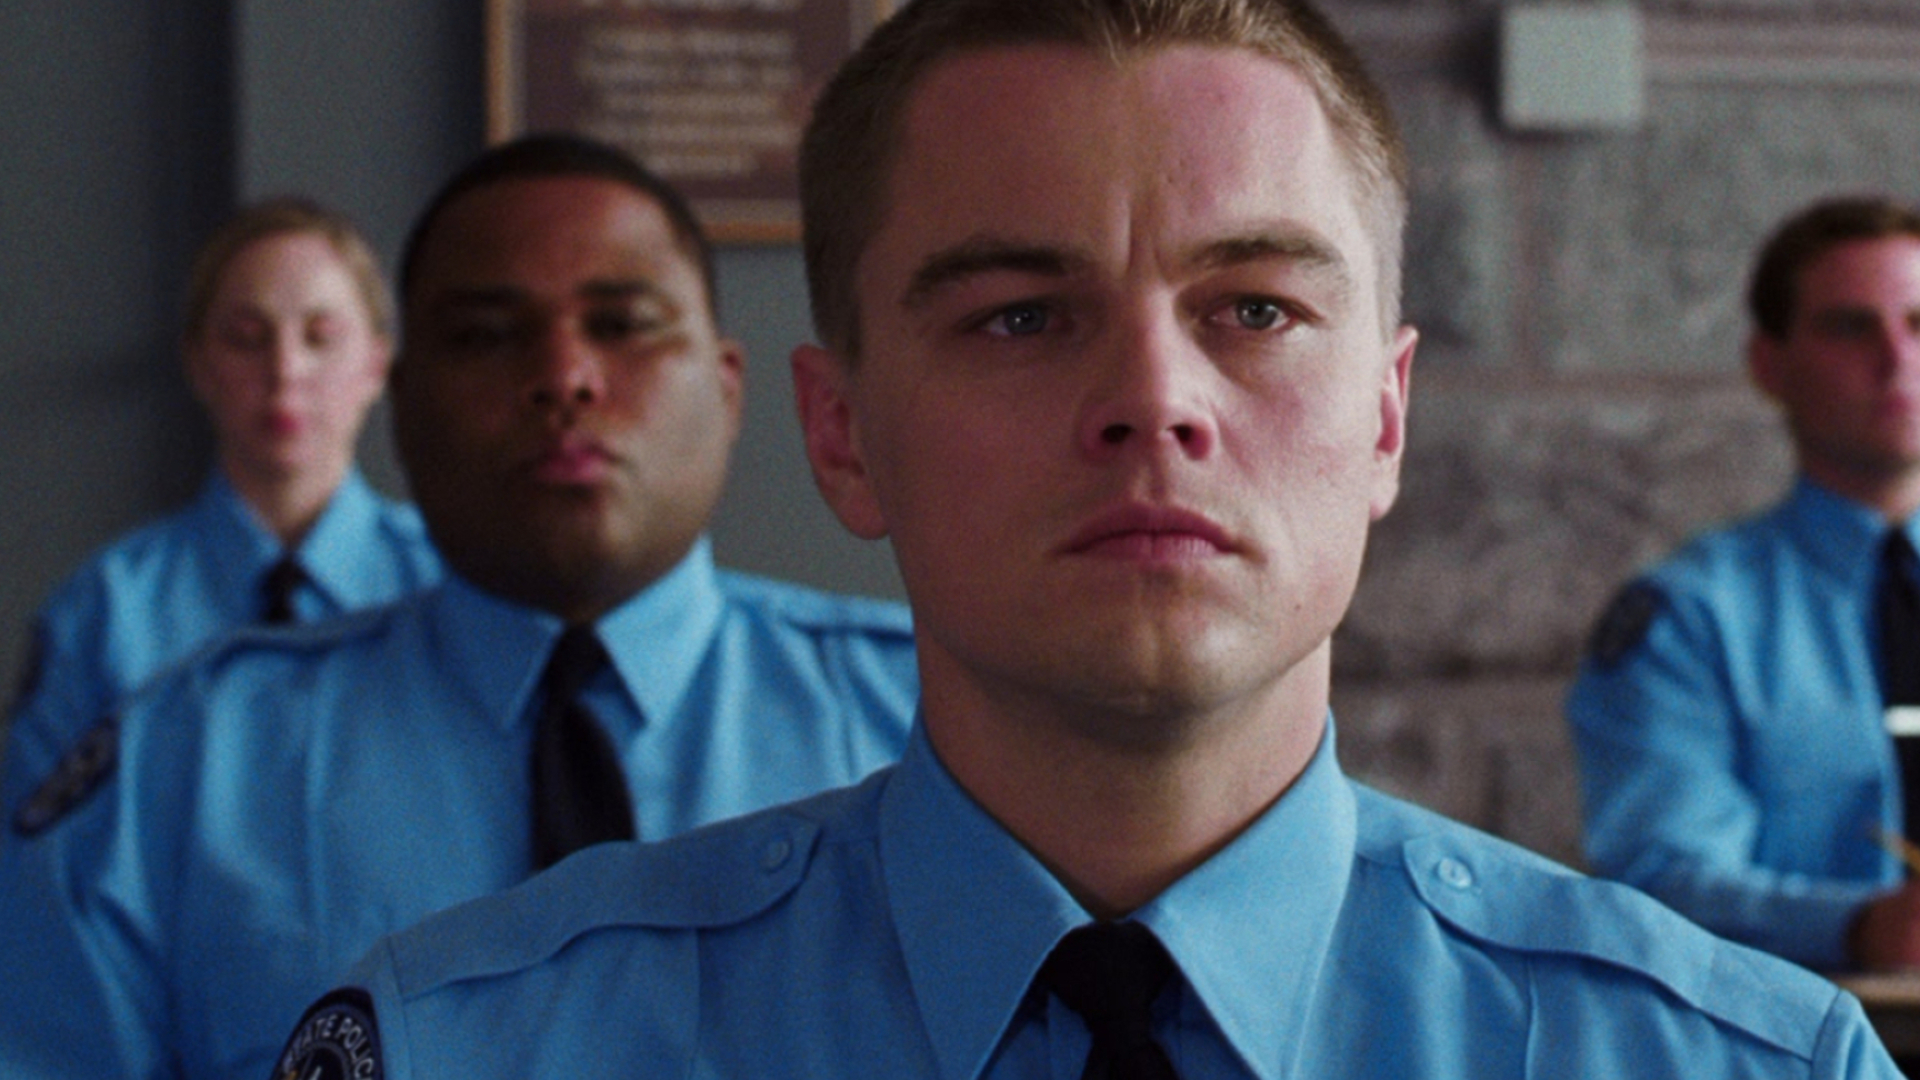 The Departed, Blu-ray screens, Stunning visuals, Enhanced viewing experience, 1920x1080 Full HD Desktop